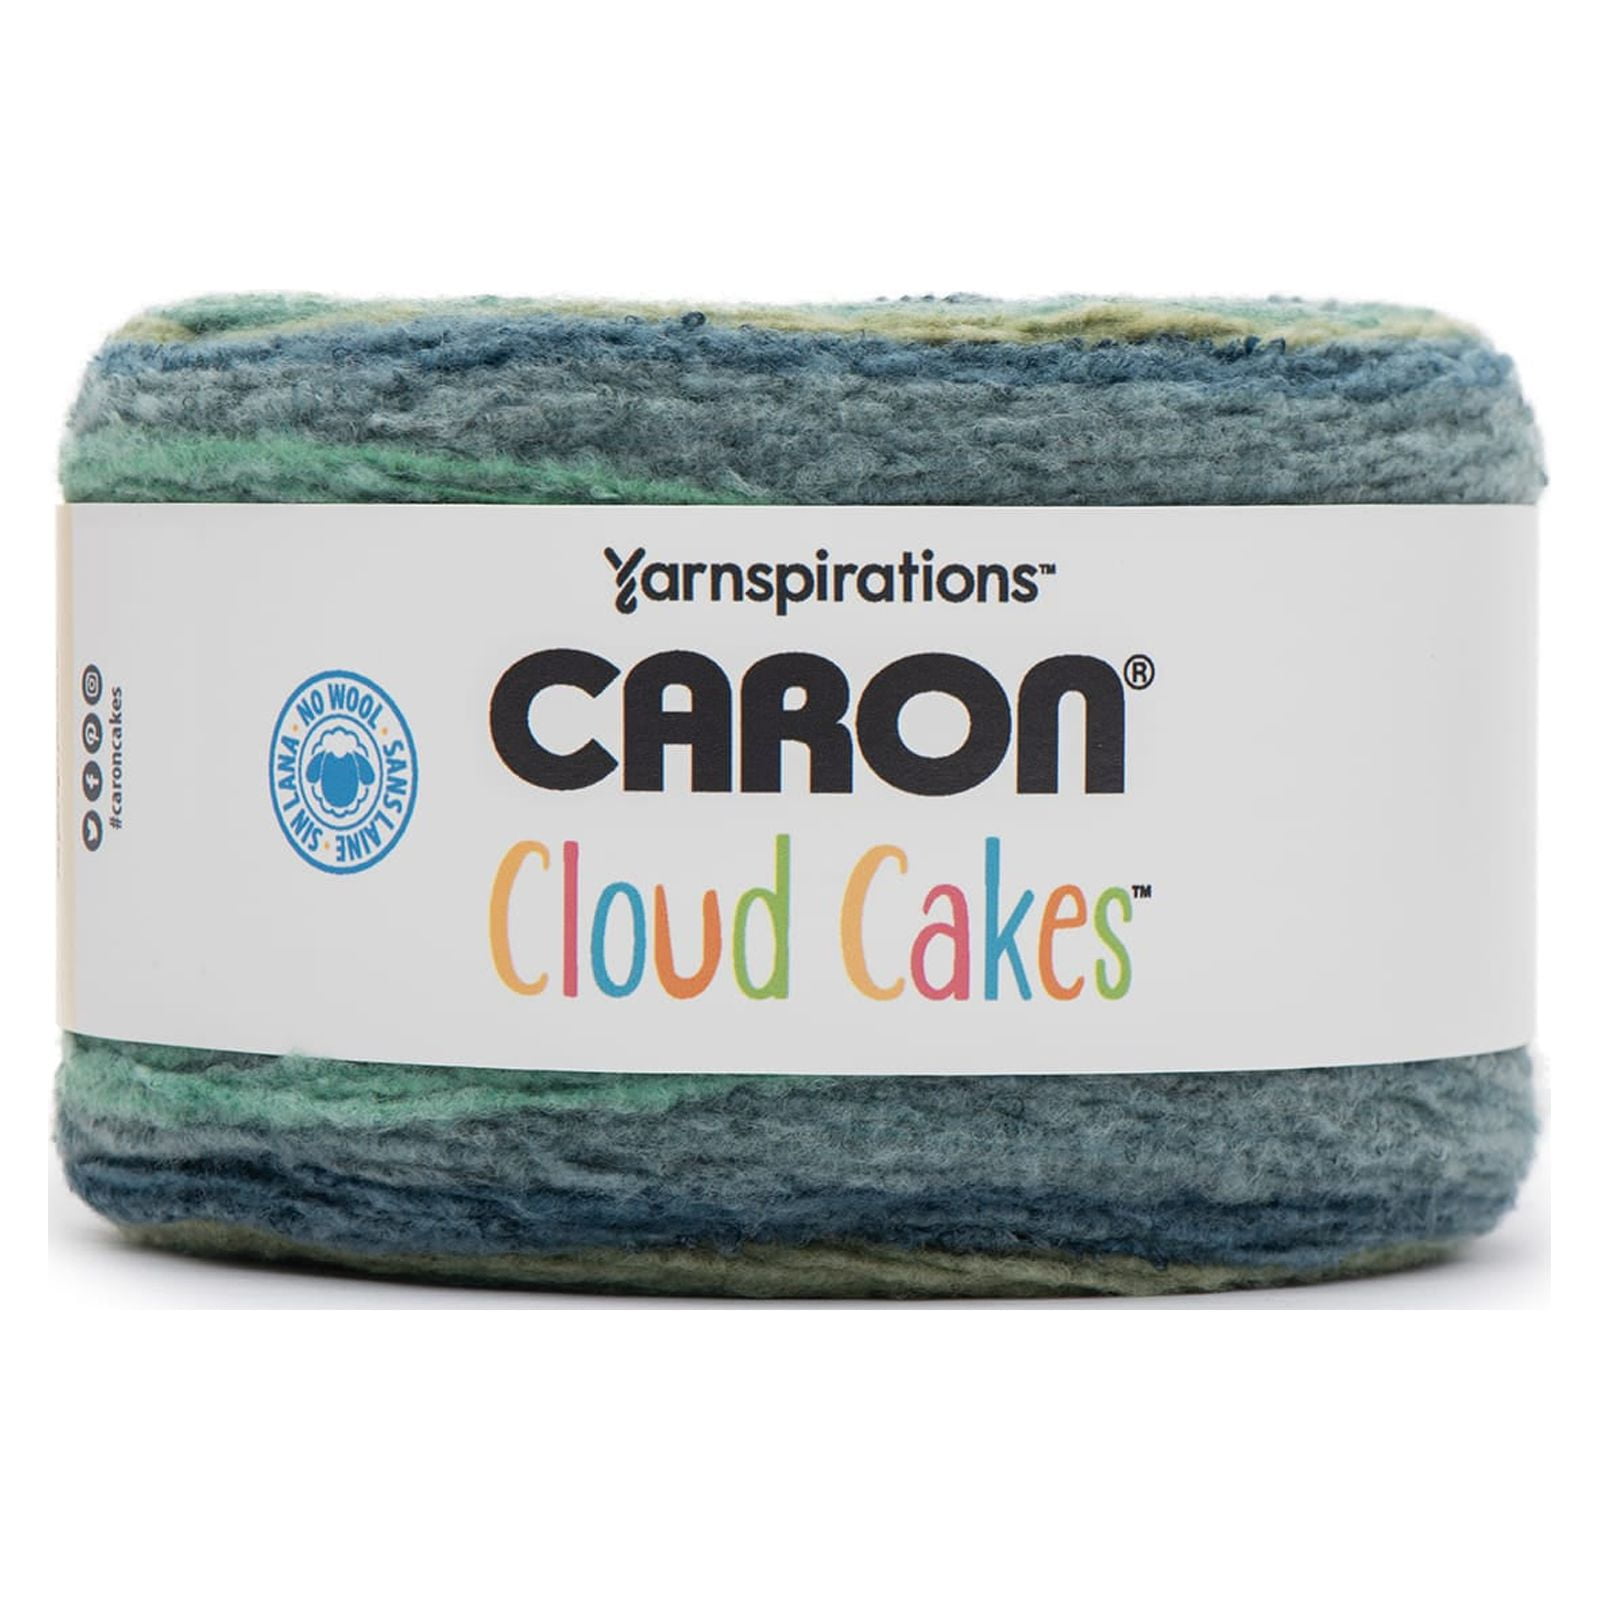 Lot of 3 Caron Cloud Cakes Yarn - DR Trouble